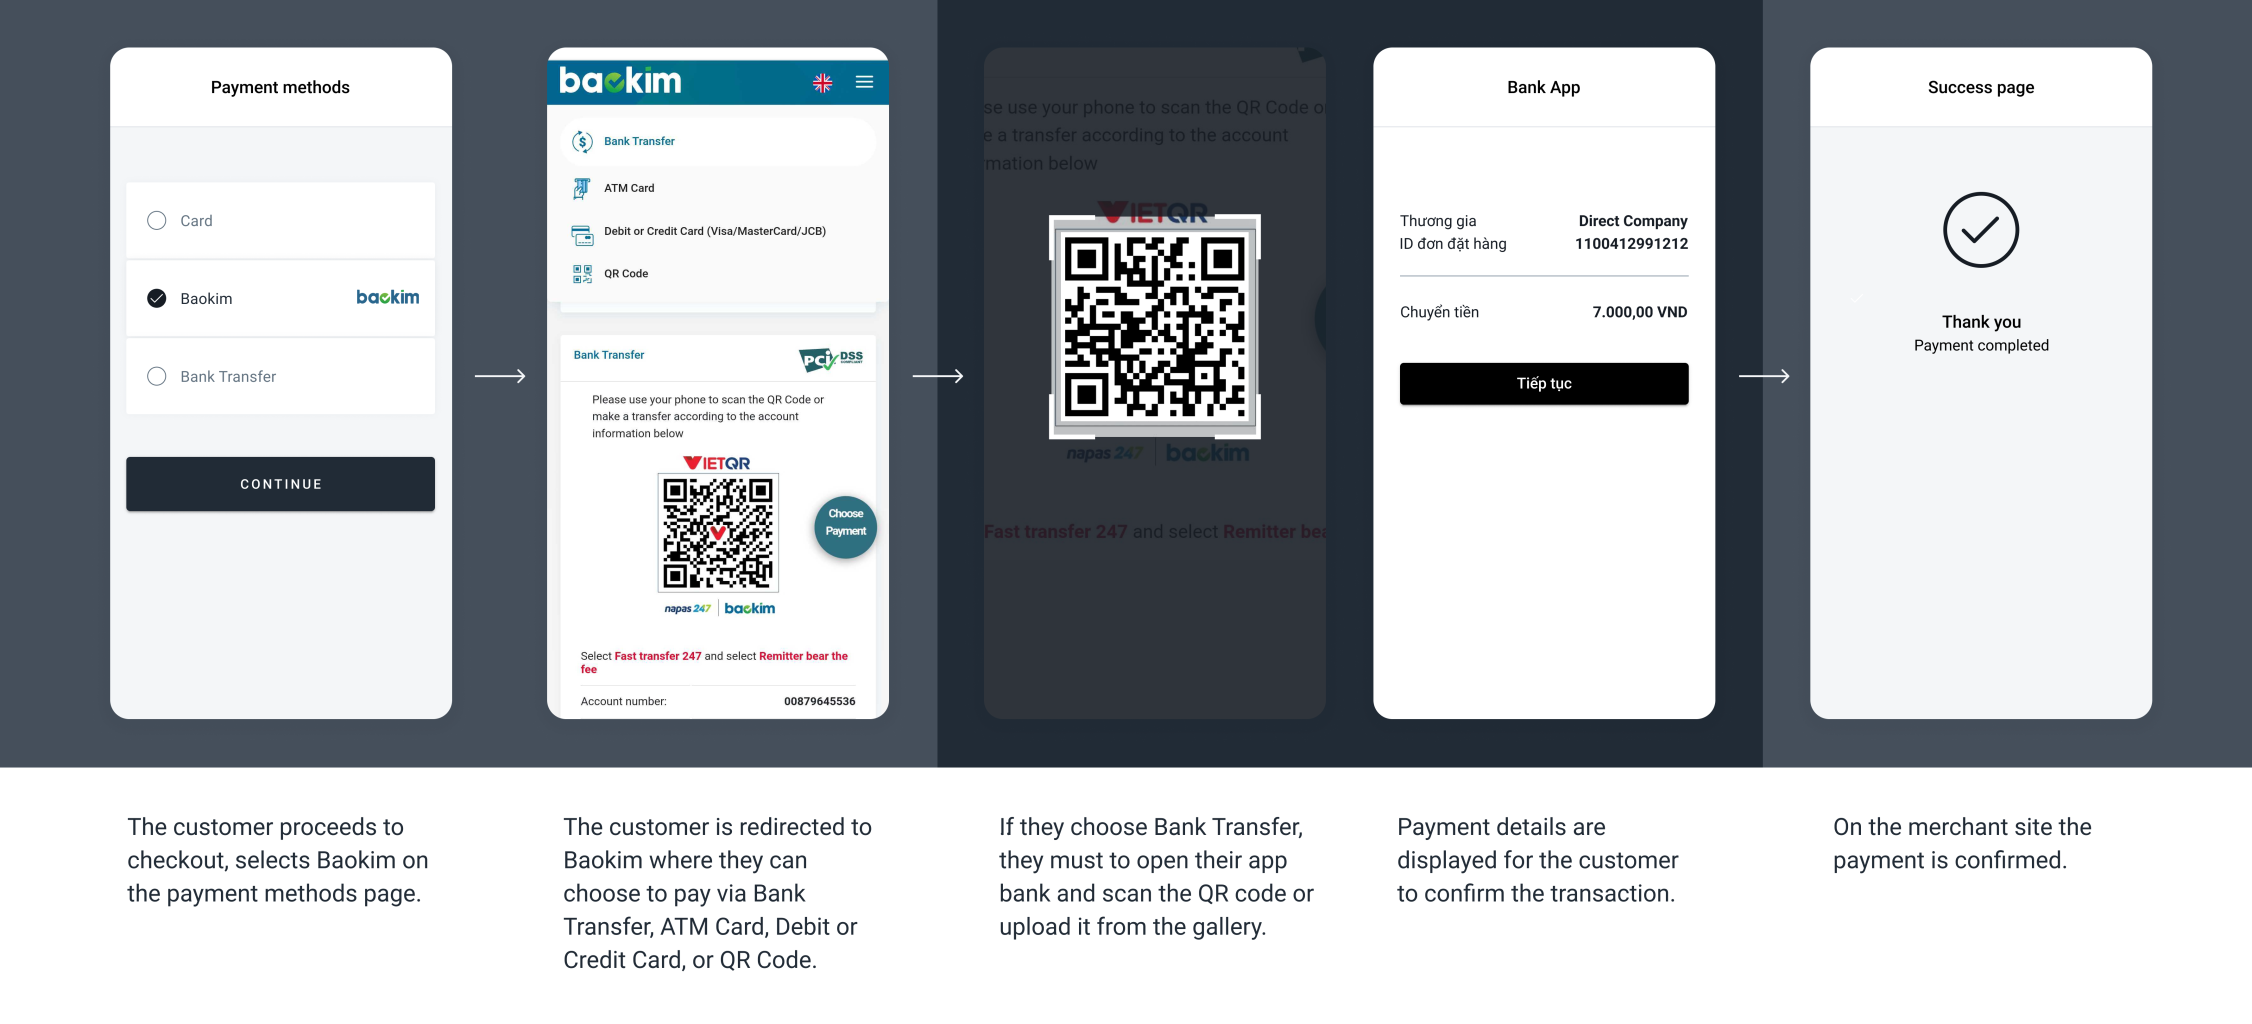 The screenshots illustrate a generic Baokim redirect flow choosing Bank Transfer as a payment method. The specifics of the flow can change depending on the payment method selected to complete the transaction.